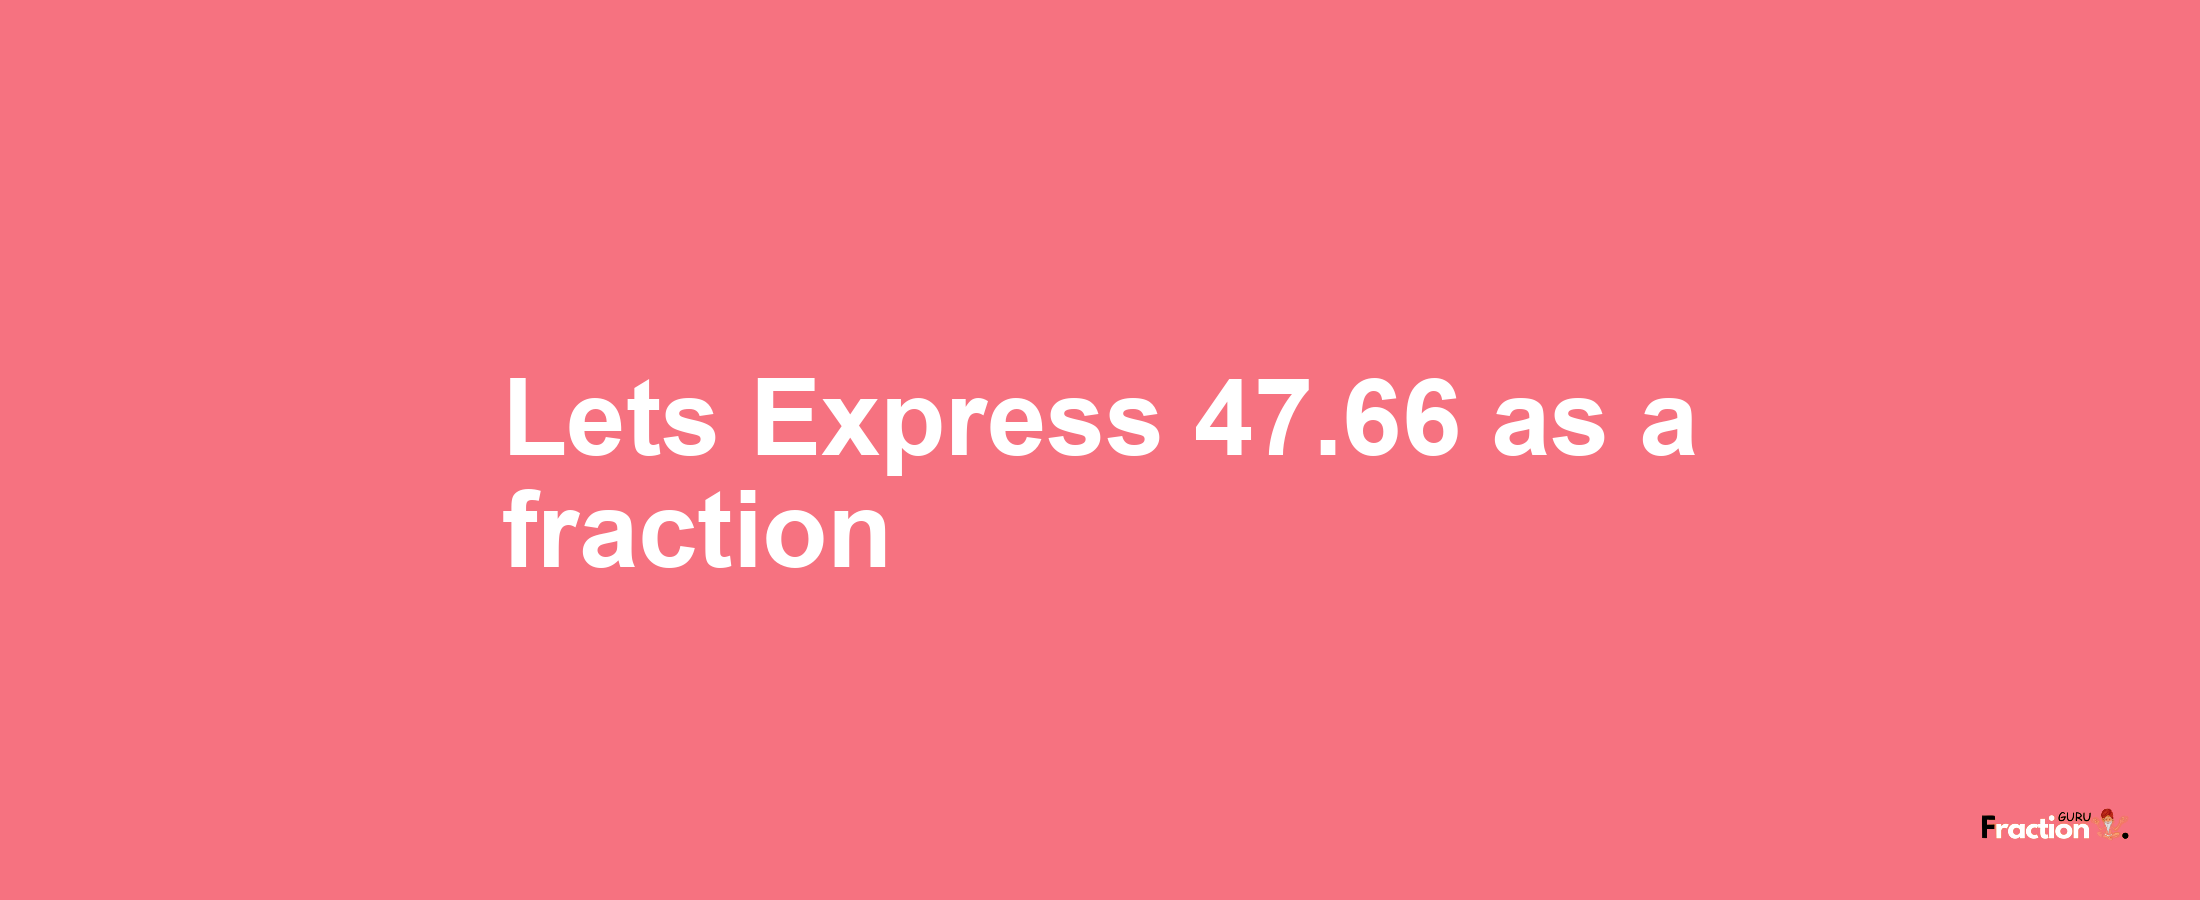 Lets Express 47.66 as afraction